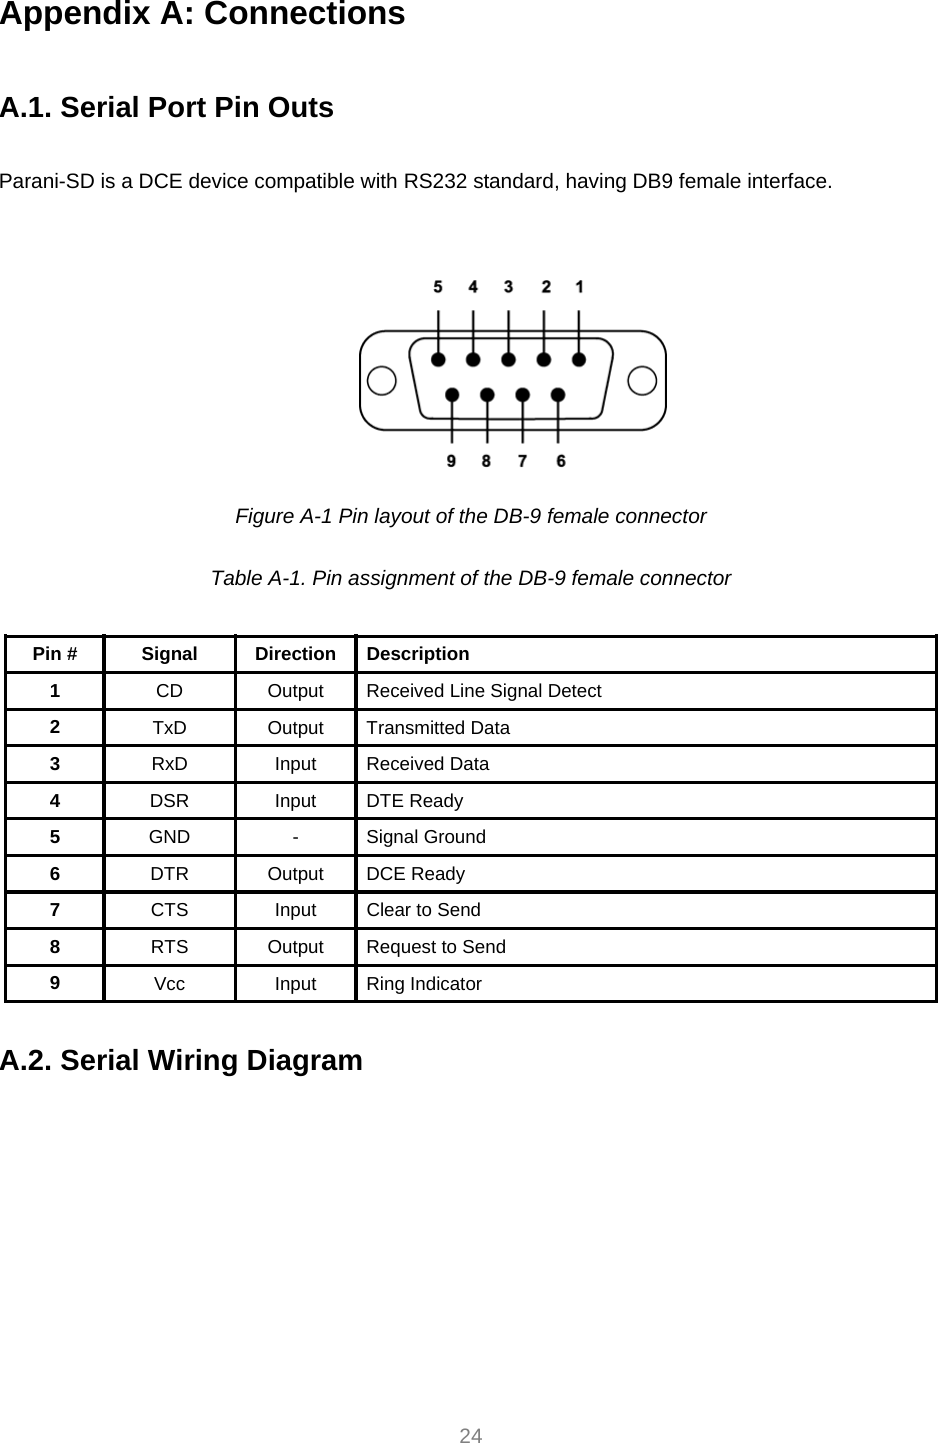  24 Appendix A: Connections  A.1. Serial Port Pin Outs  Parani-SD is a DCE device compatible with RS232 standard, having DB9 female interface.    Figure A-1 Pin layout of the DB-9 female connector  Table A-1. Pin assignment of the DB-9 female connector  Pin #  Signal  Direction  Description 1  CD  Output  Received Line Signal Detect 2  TxD Output Transmitted Data 3  RxD Input Received Data 4  DSR Input DTE Ready 5  GND - Signal Ground 6  DTR Output DCE Ready 7  CTS  Input  Clear to Send 8  RTS  Output  Request to Send 9  Vcc Input Ring Indicator  A.2. Serial Wiring Diagram  